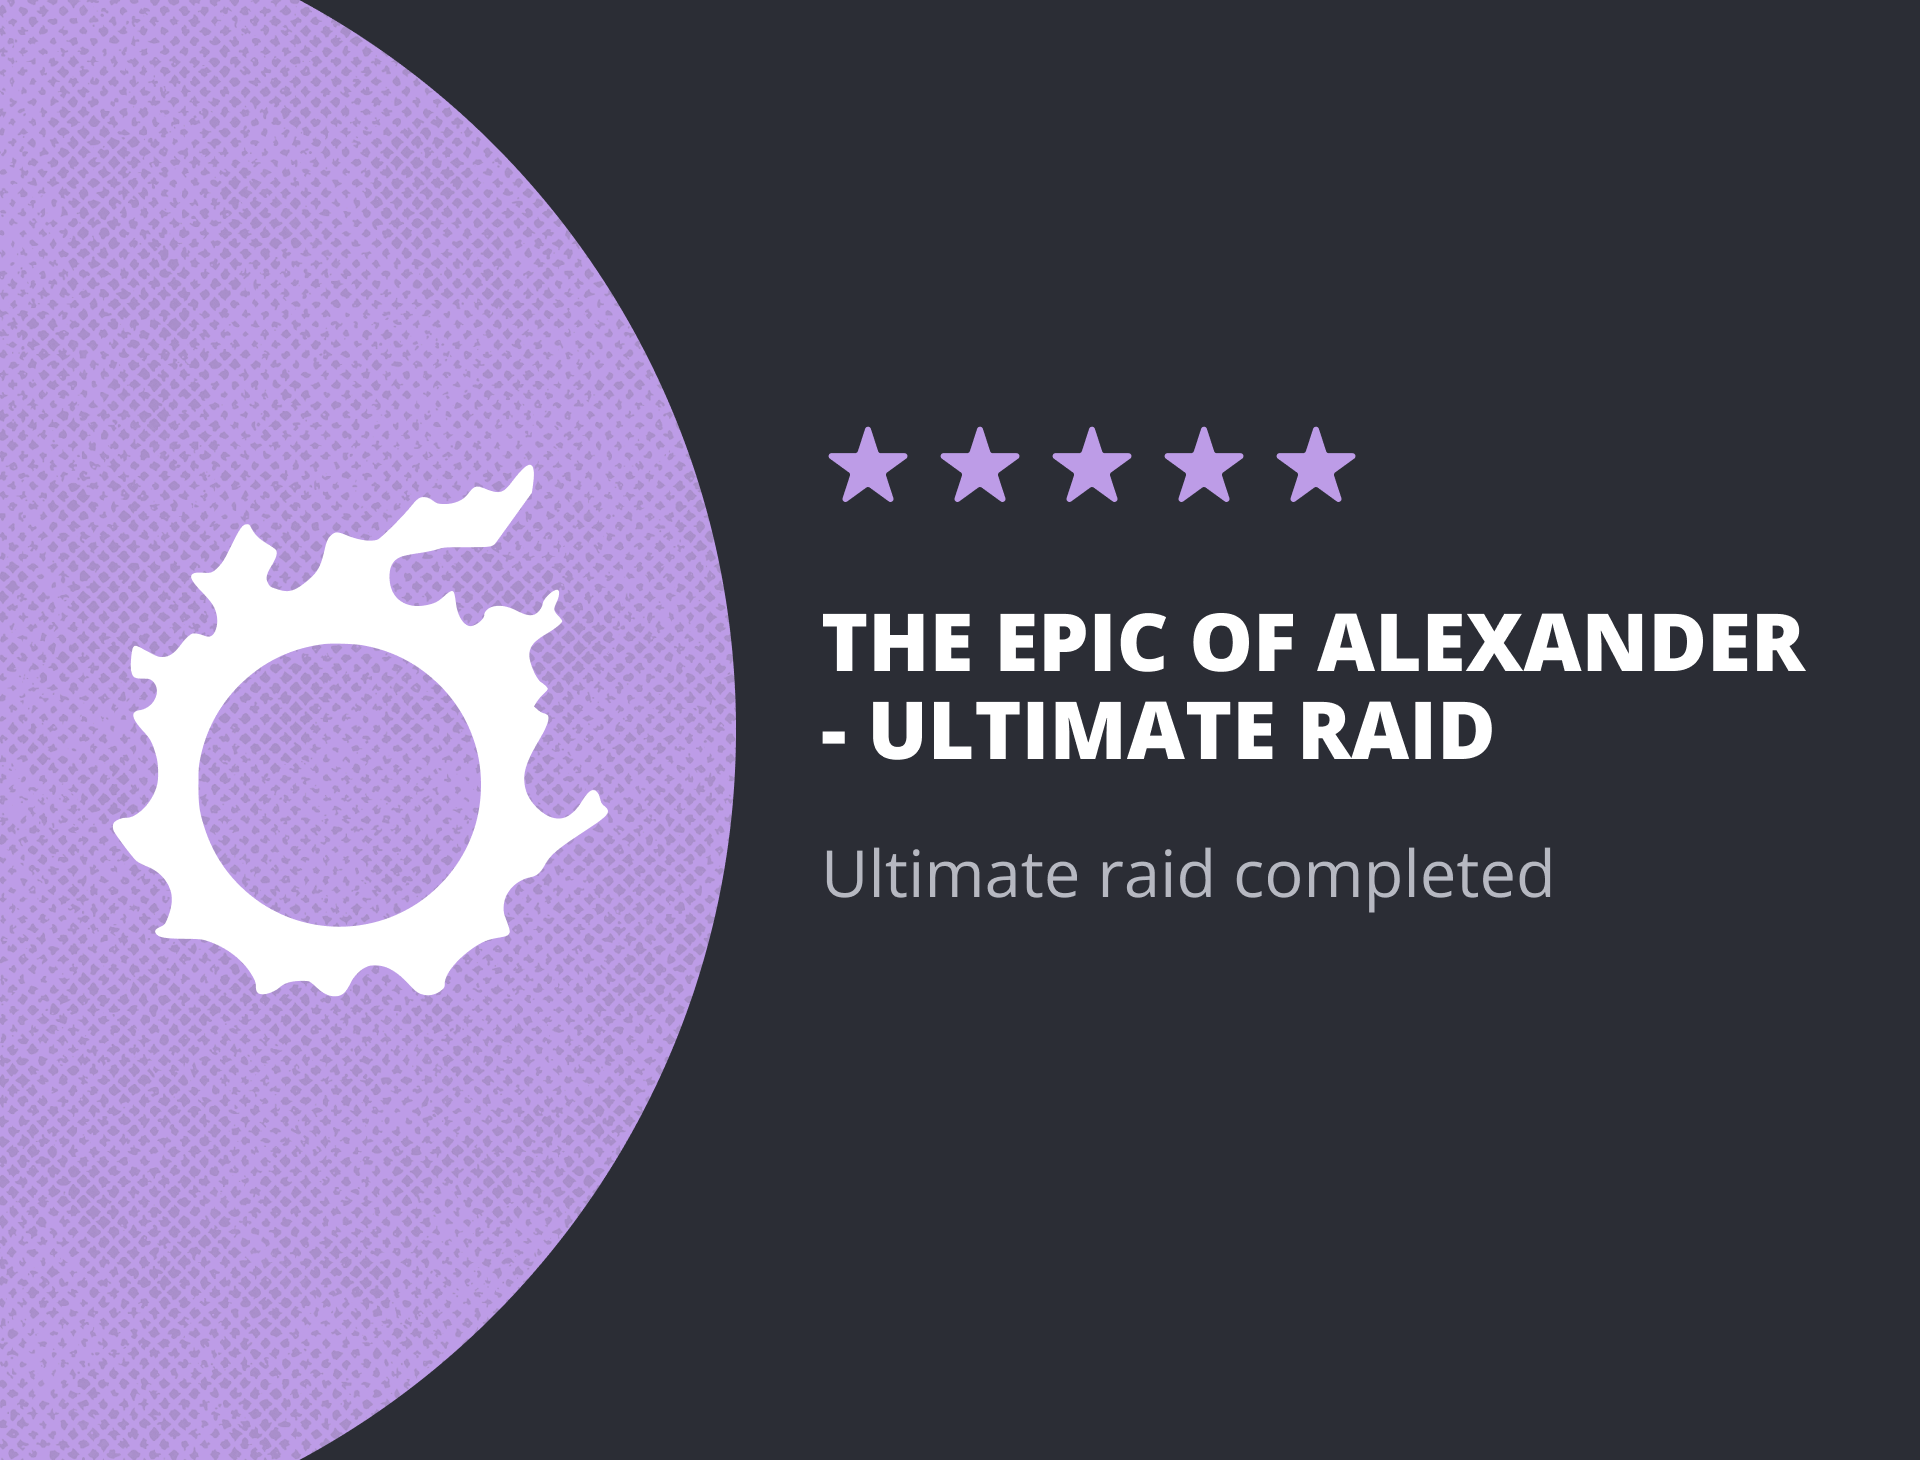 The Epic Of Alexander - Ultimate Raid